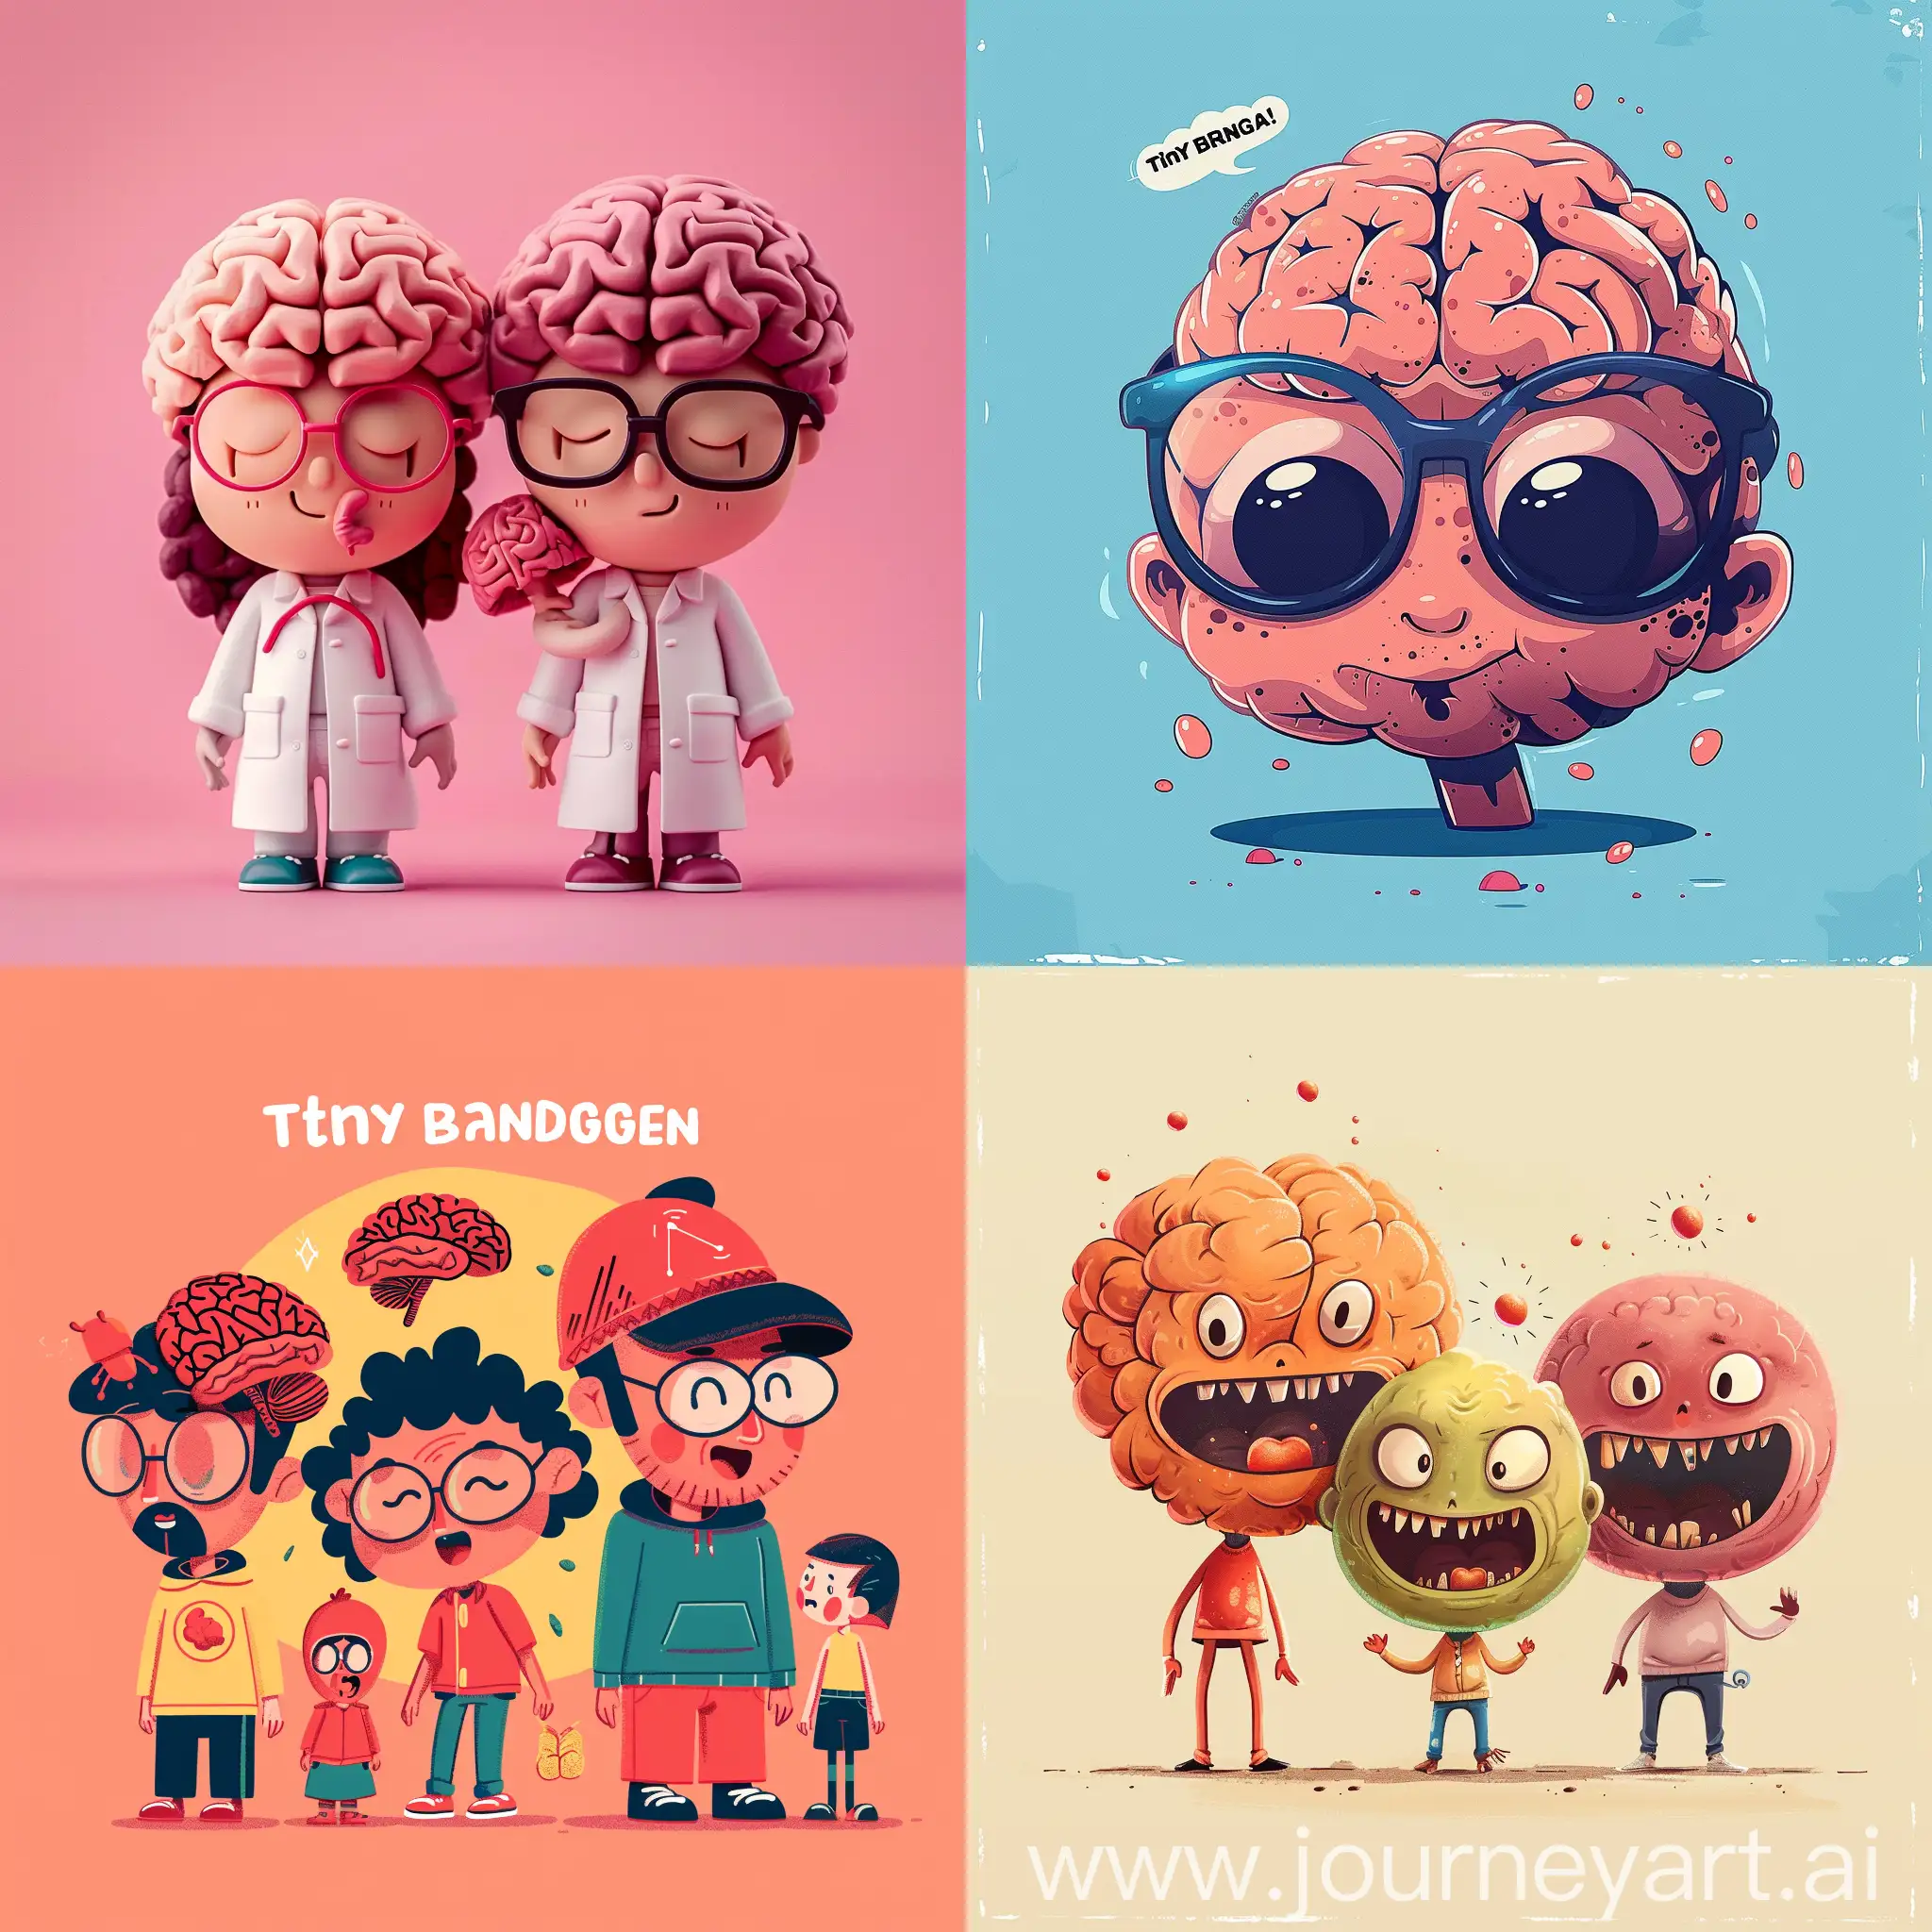 Generate a new profile picture for my friendgroup to put in our whatsapp group picture. We are neuroscientists and our group is called "Tiny Brain Productions". Use this text and something fun with brains.